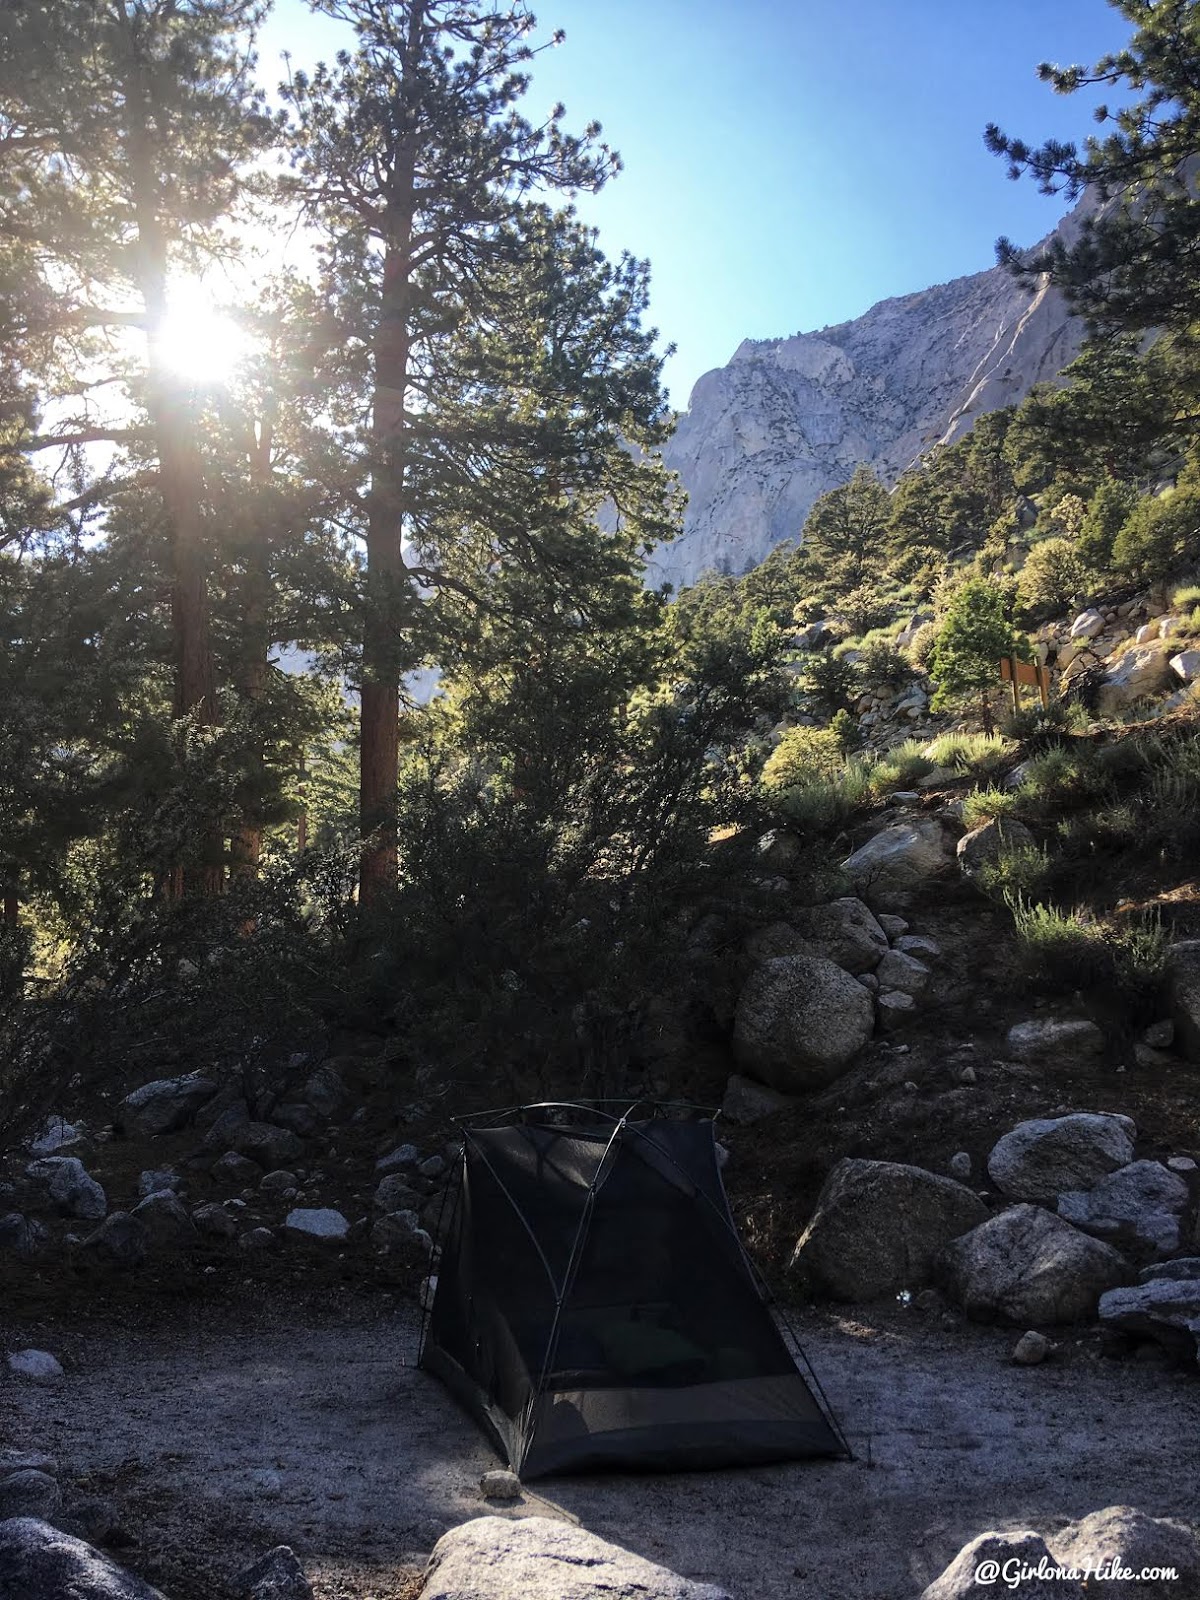 Hiking to Mt.Whitney, Hiking Mt.Whitney in 2020, whitney portal campground